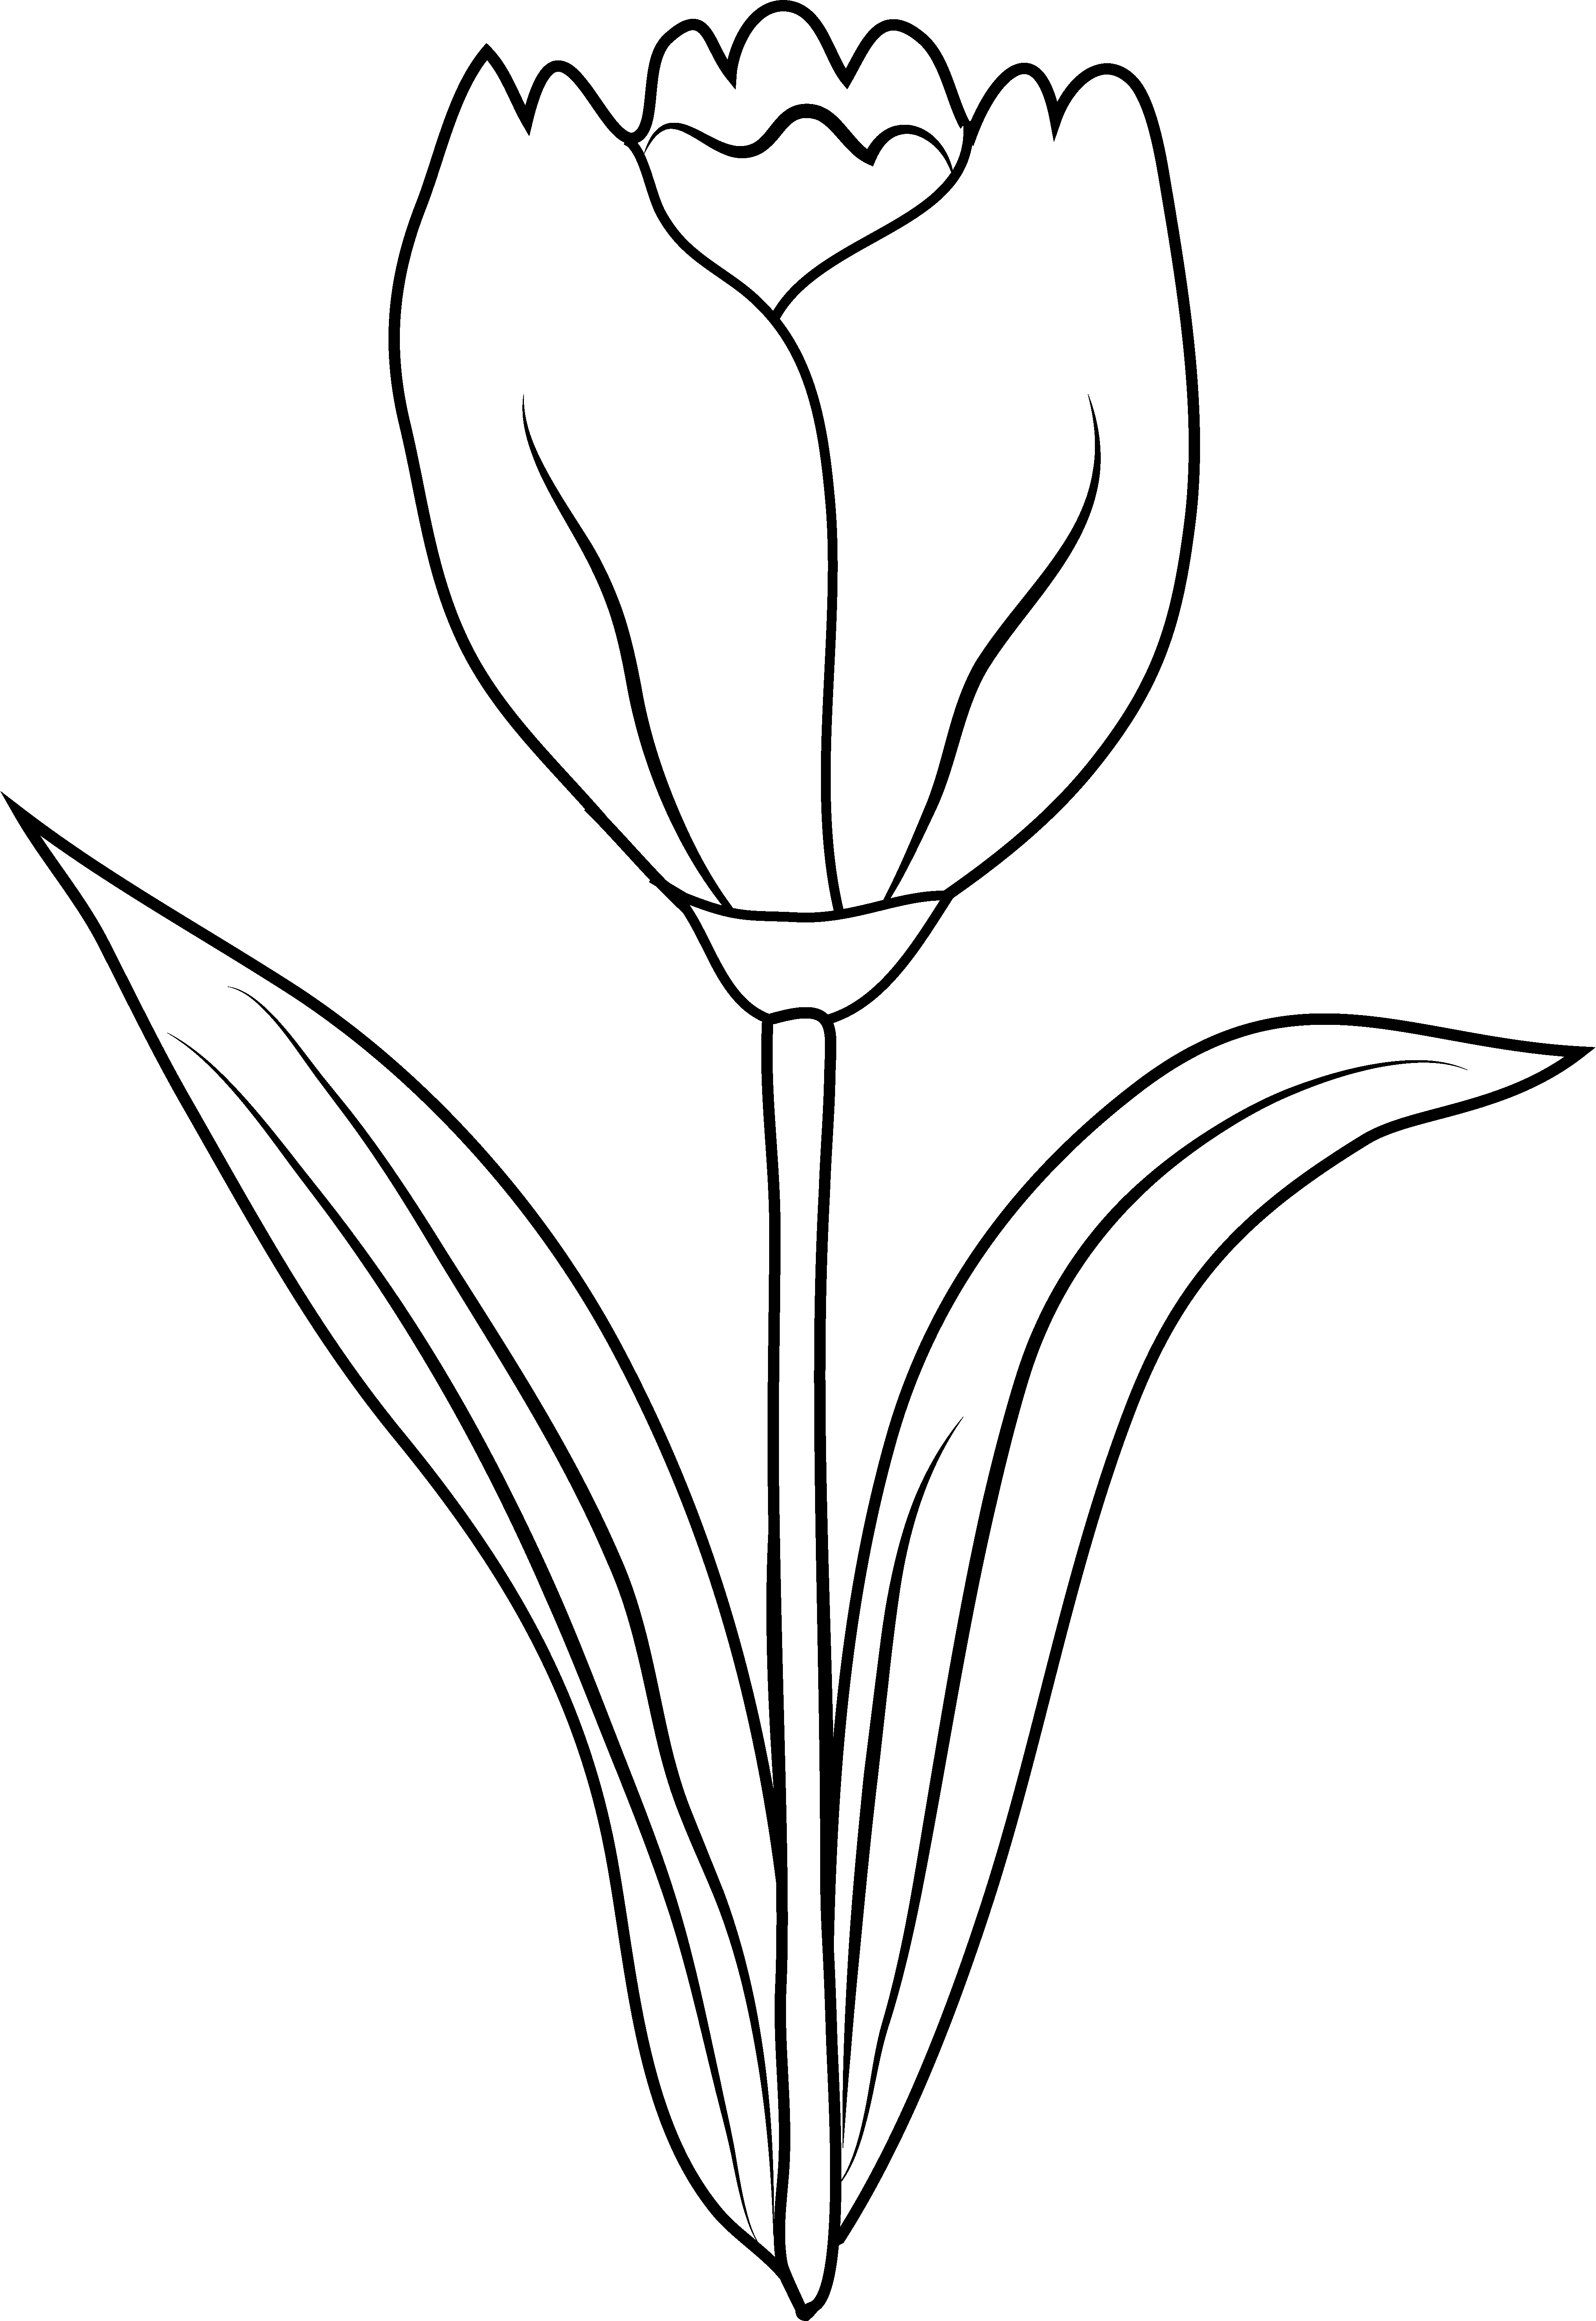 Clipart Flower Black And White Cliparts.co